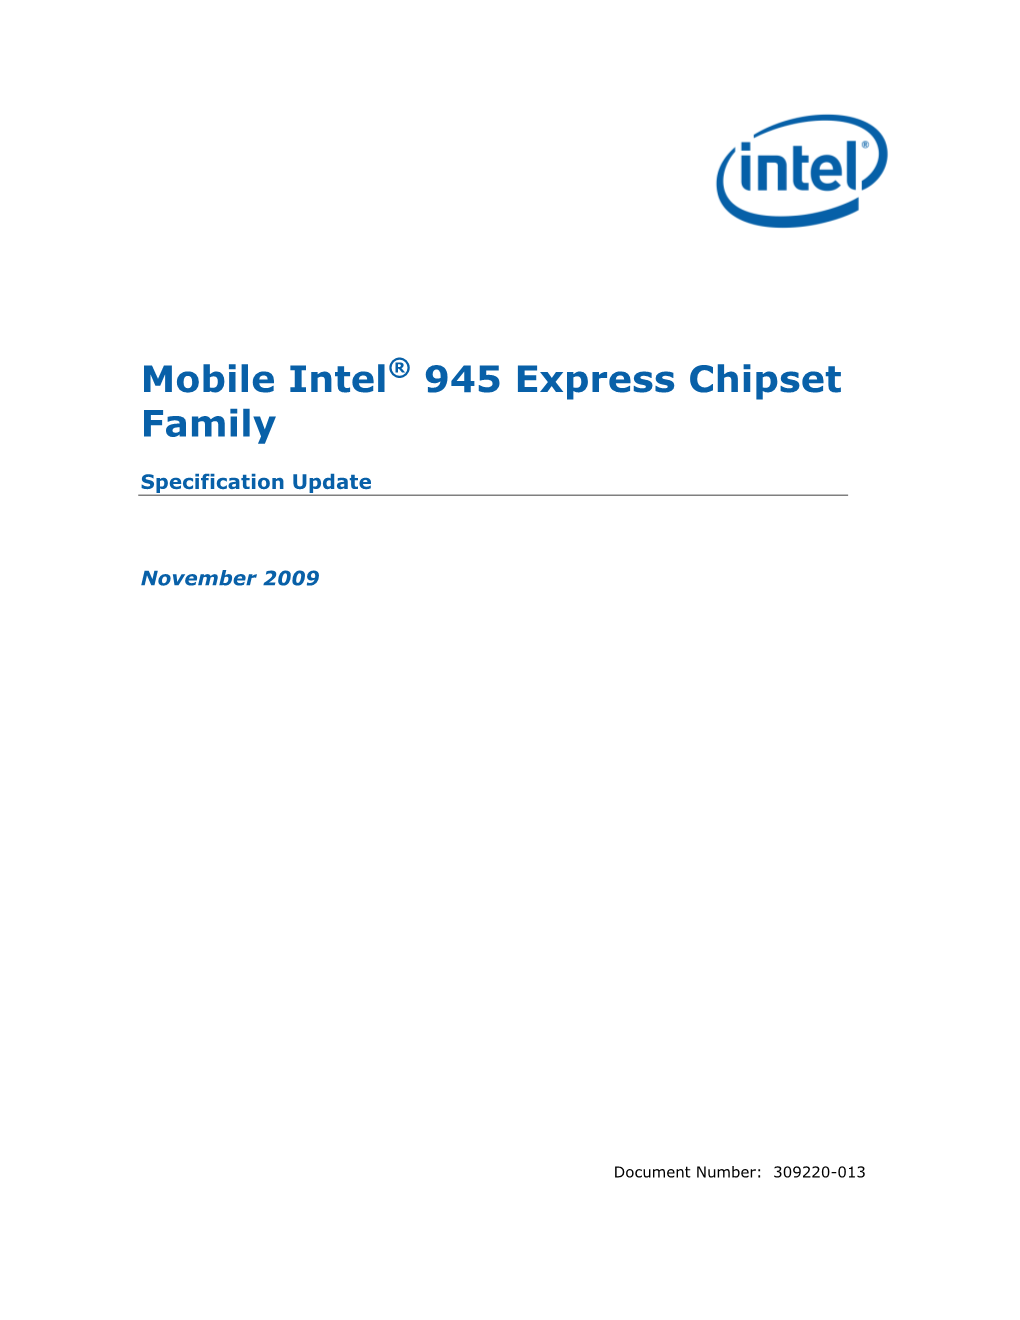 Mobile Intel® 945 Express Chipset Family Specification Update